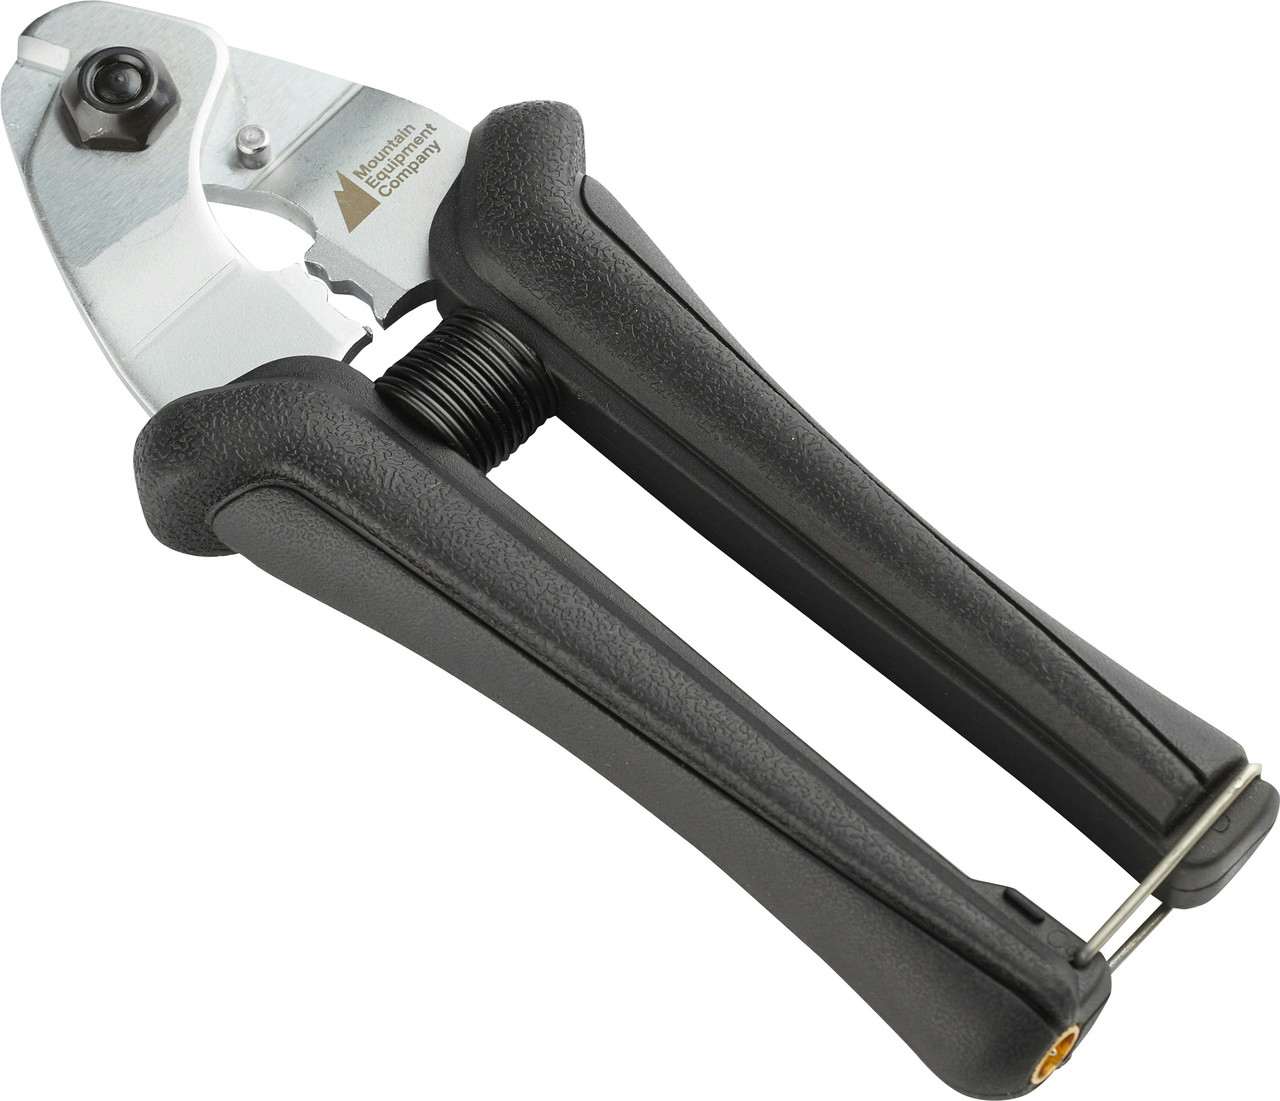 Cable Cutter Tool Black